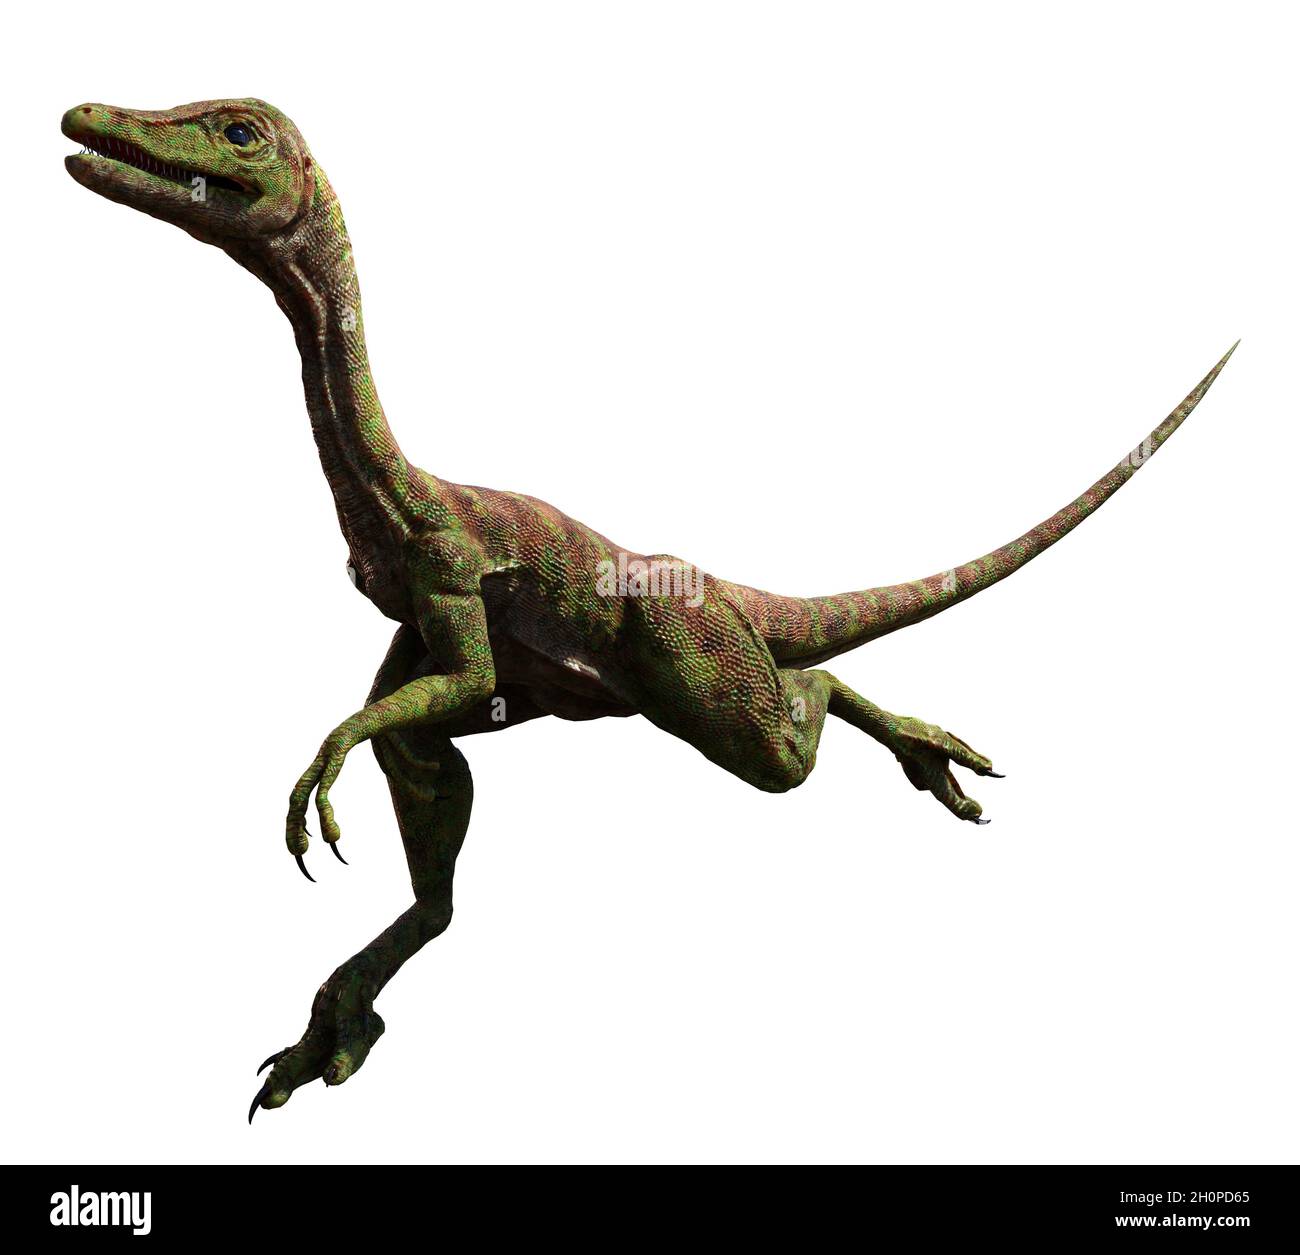 Compsognathus longipes attack, small dinosaur from the Late Jurassic period, isolated on white background Stock Photo